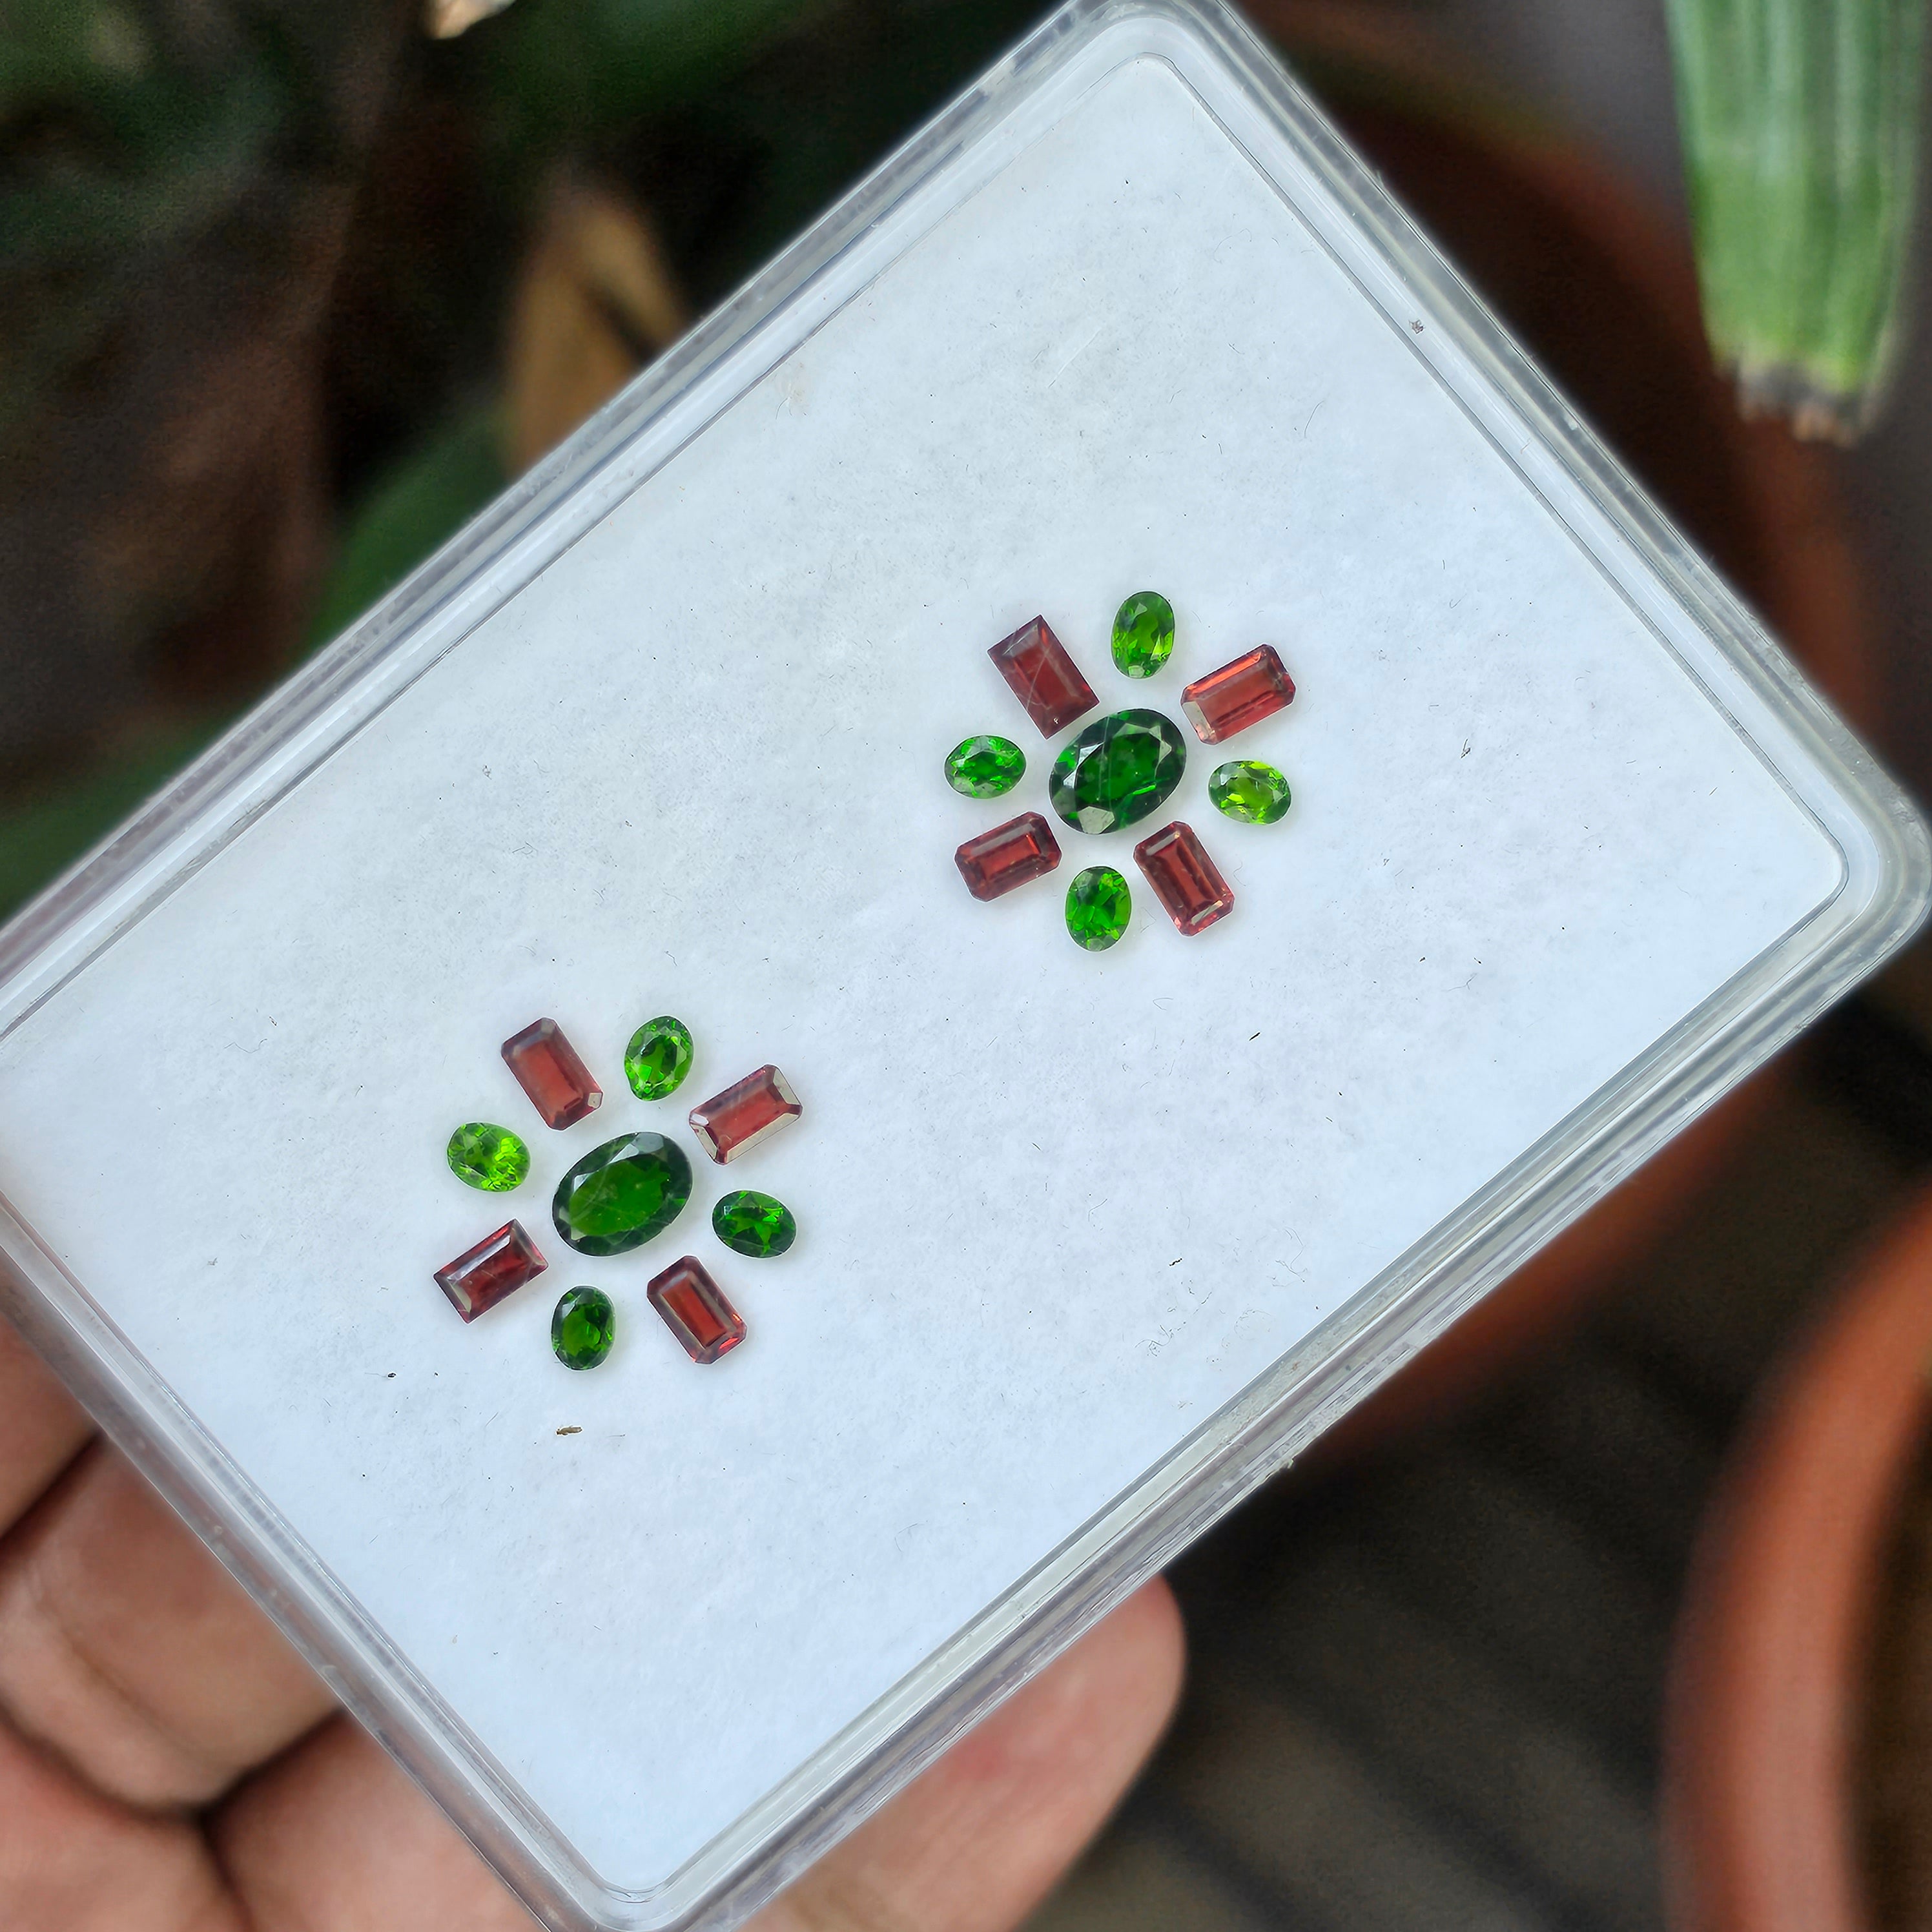 18 Pcs Natural Garnet And Chrome Diopside Gemstone Faceted Oval And Rectangle Shape:| Size 4-7mm - The LabradoriteKing